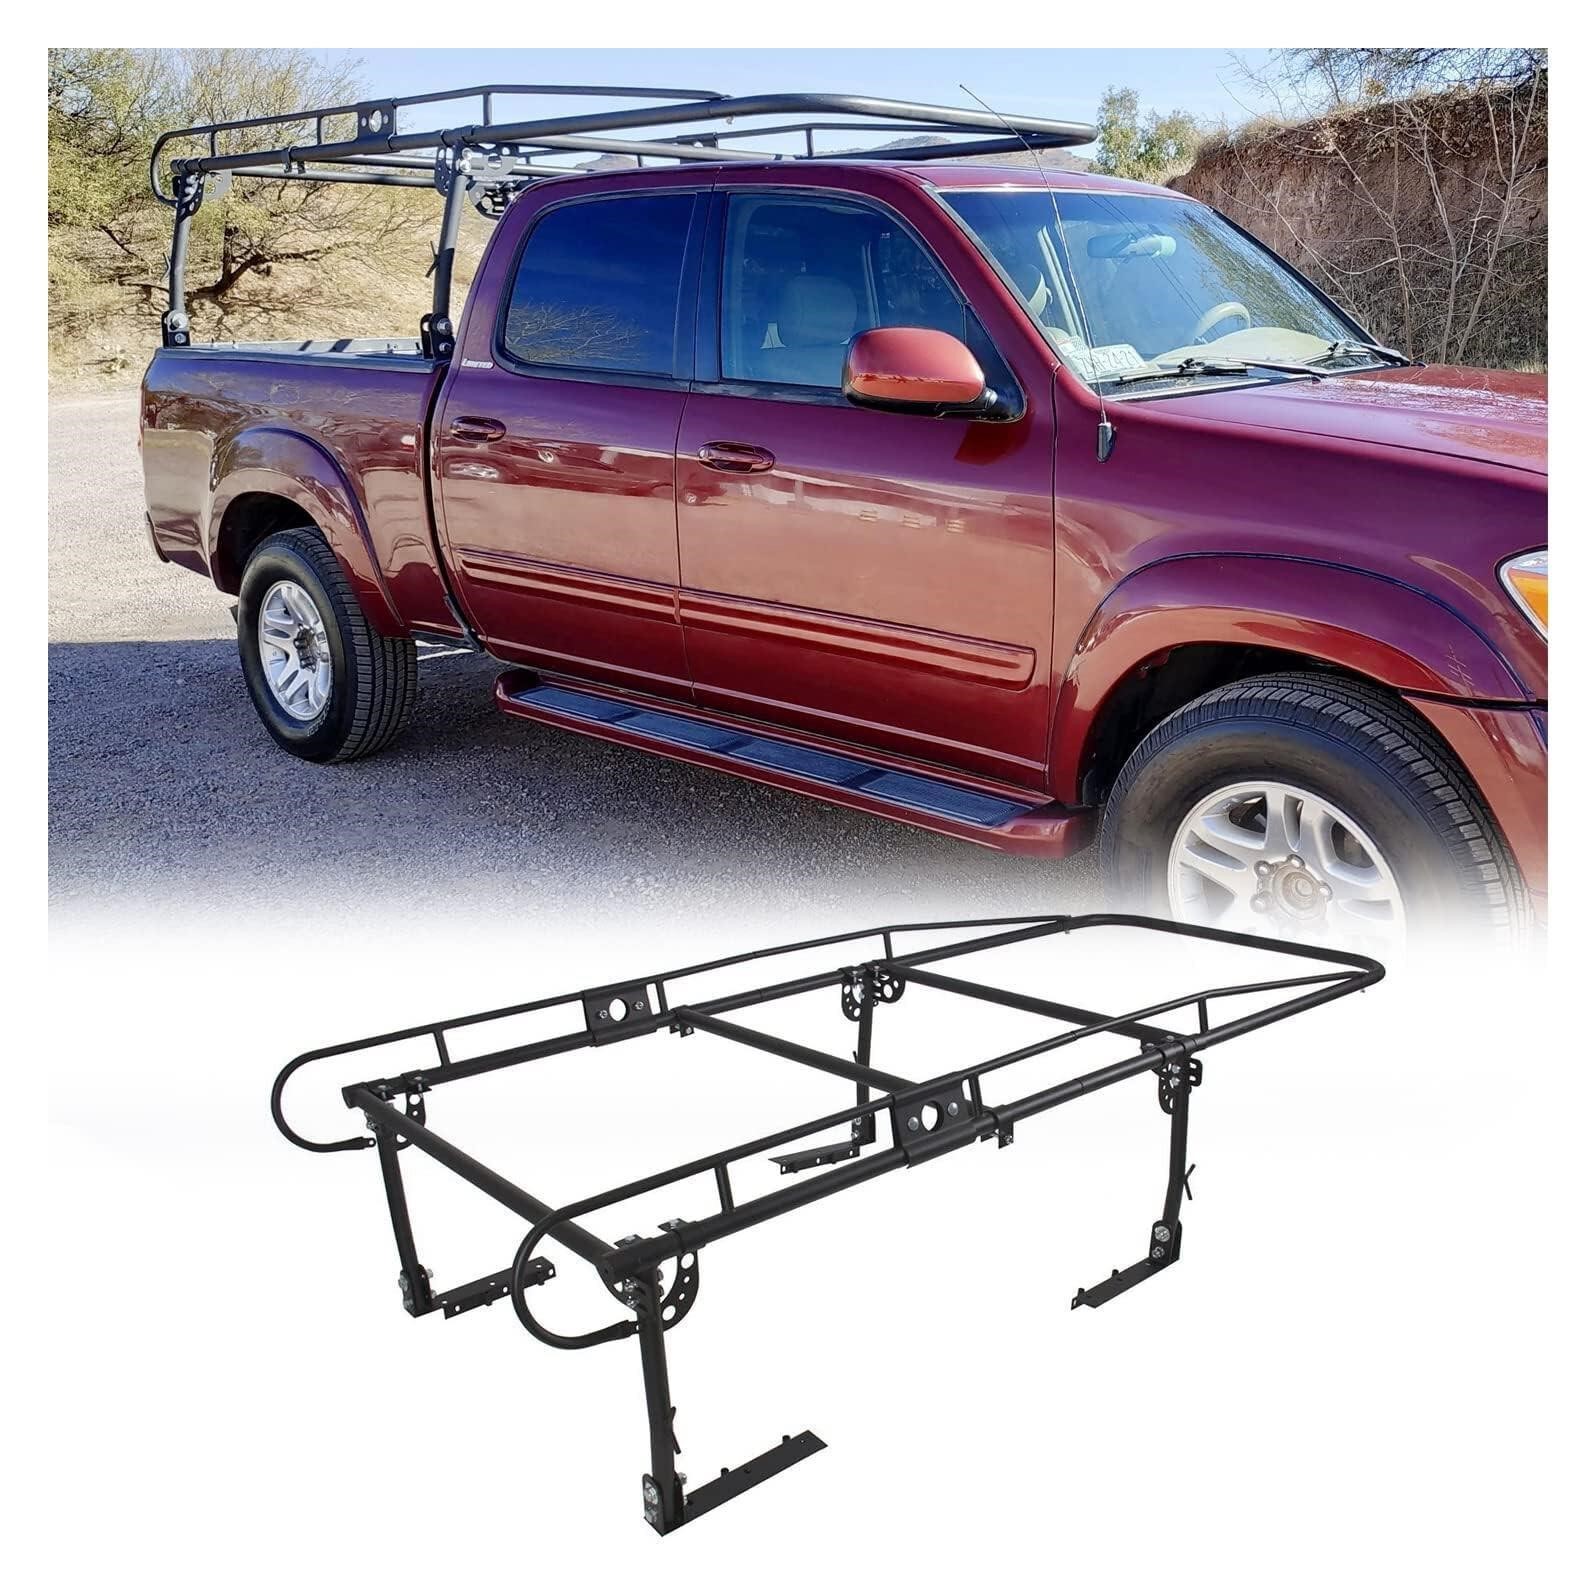 ECOTRIC 1000 LBS Adjustable Truck Bed Rack Contrac